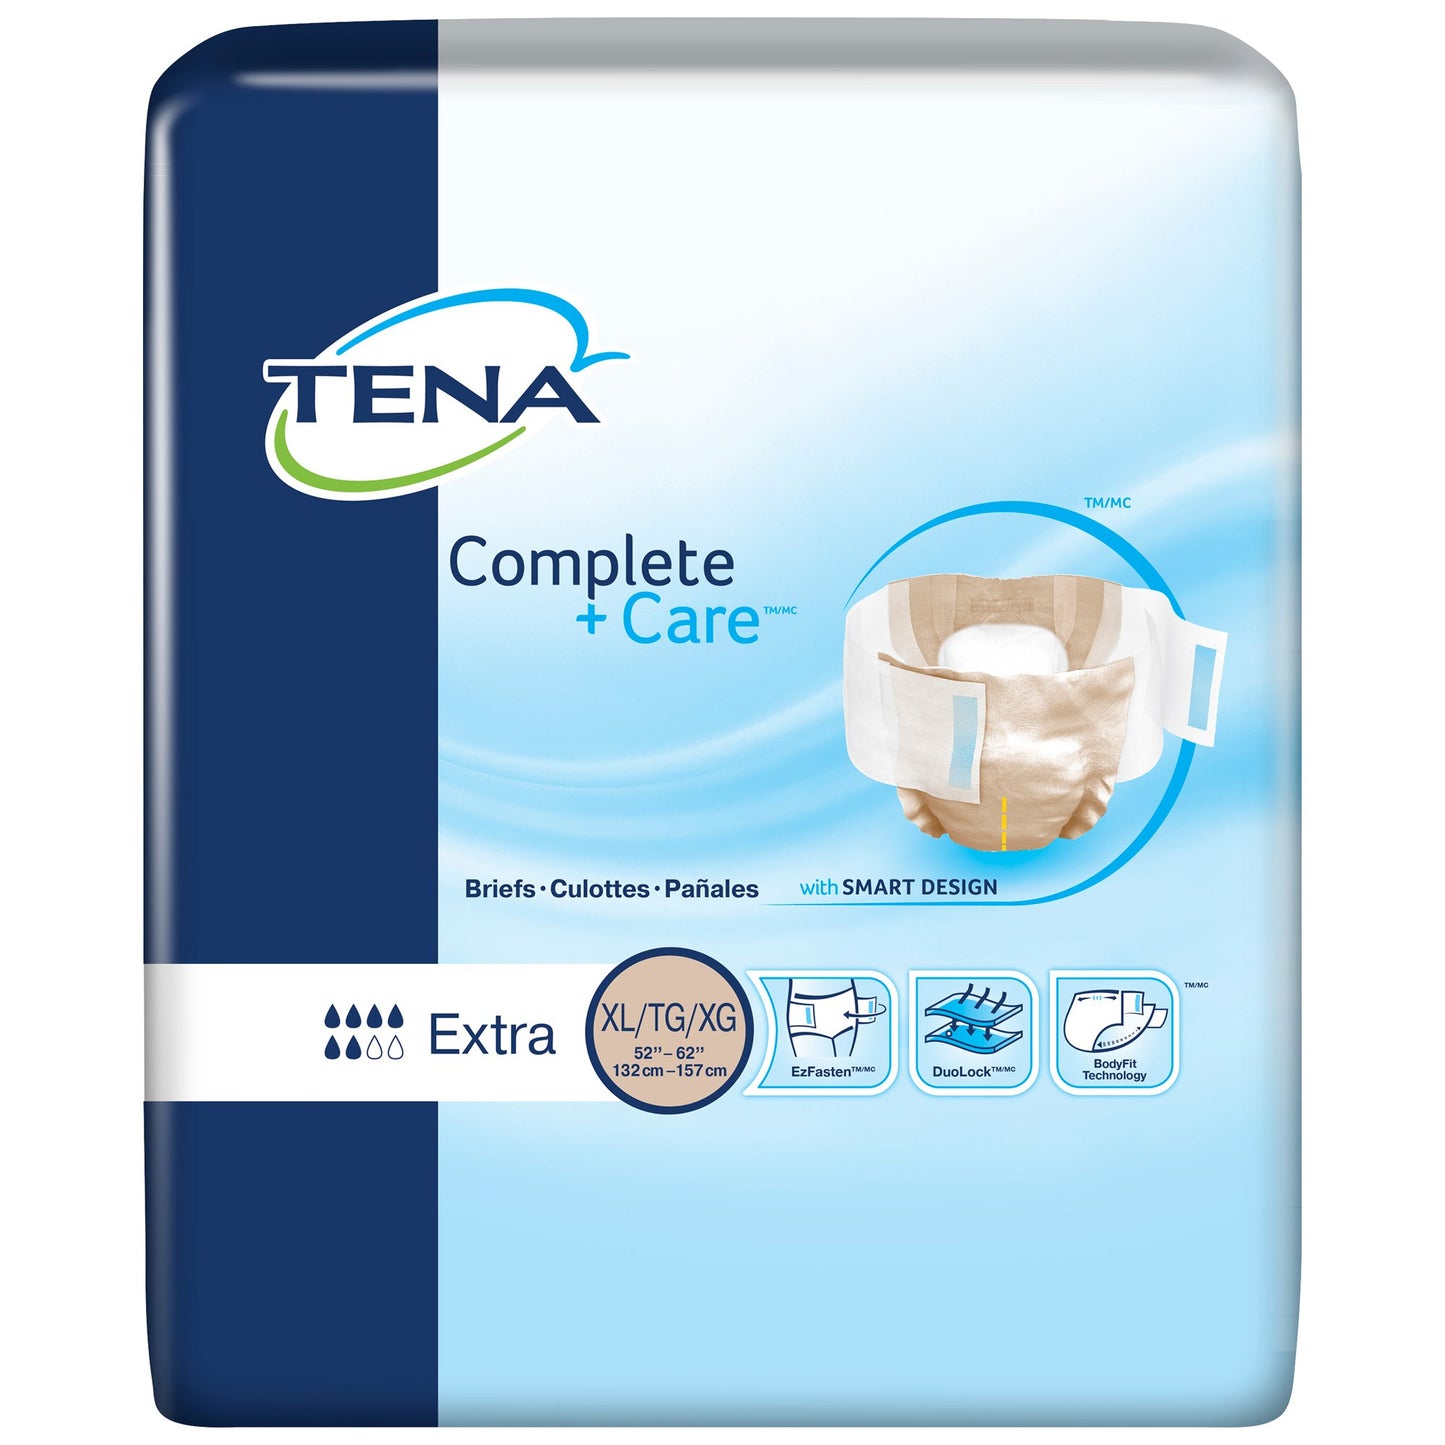 Tena® Complete +Care™ Extra Incontinence Brief, XL, 24 ct